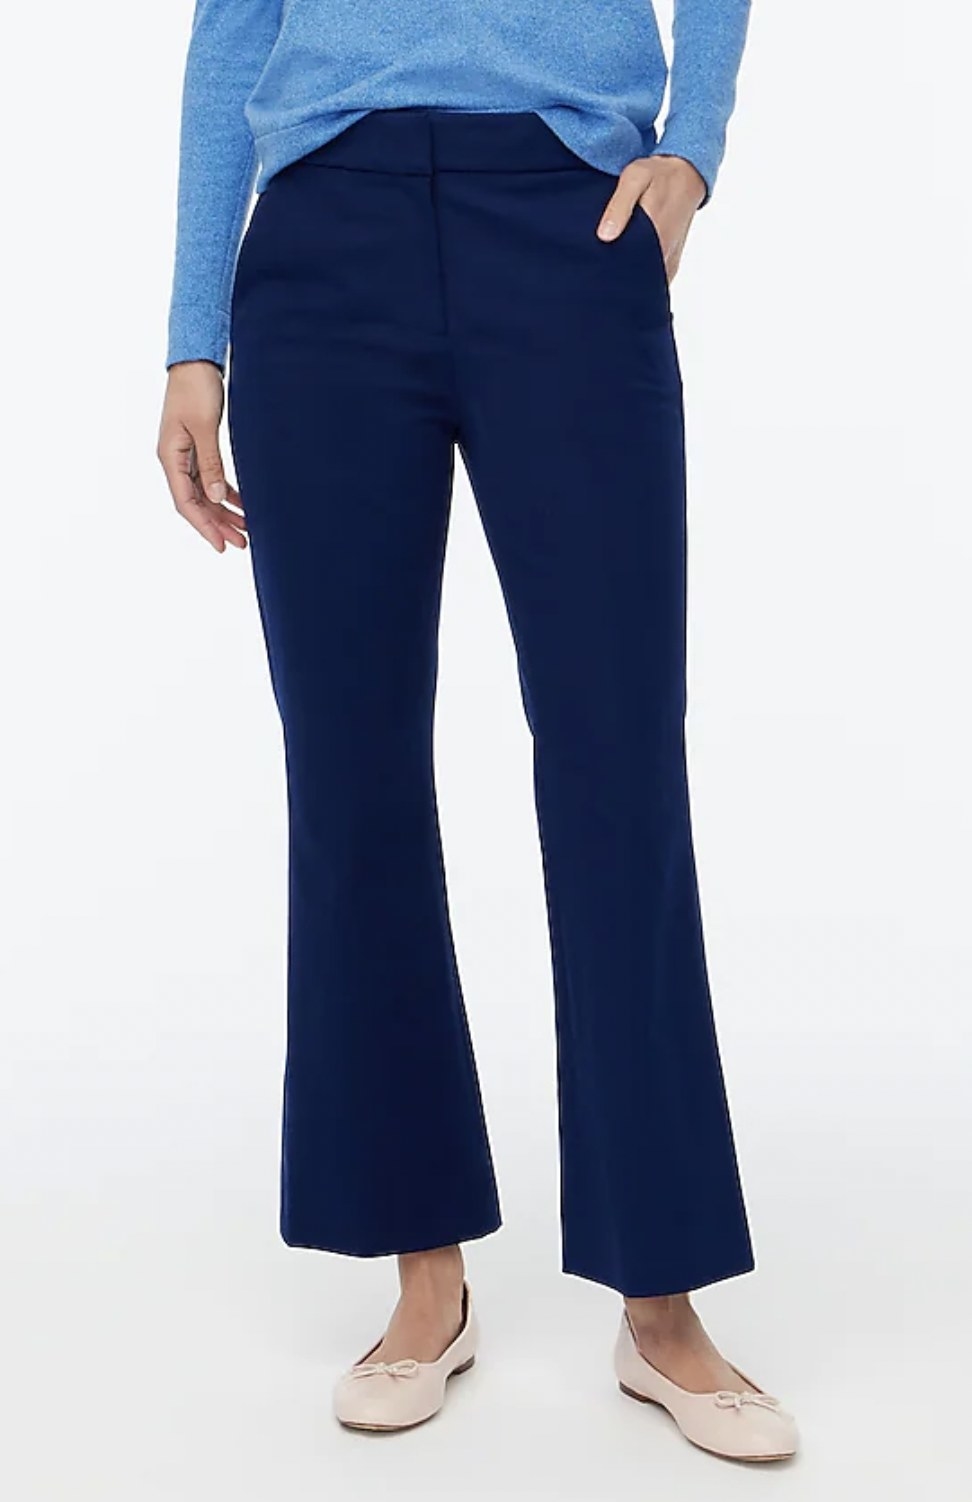 the pants in navy